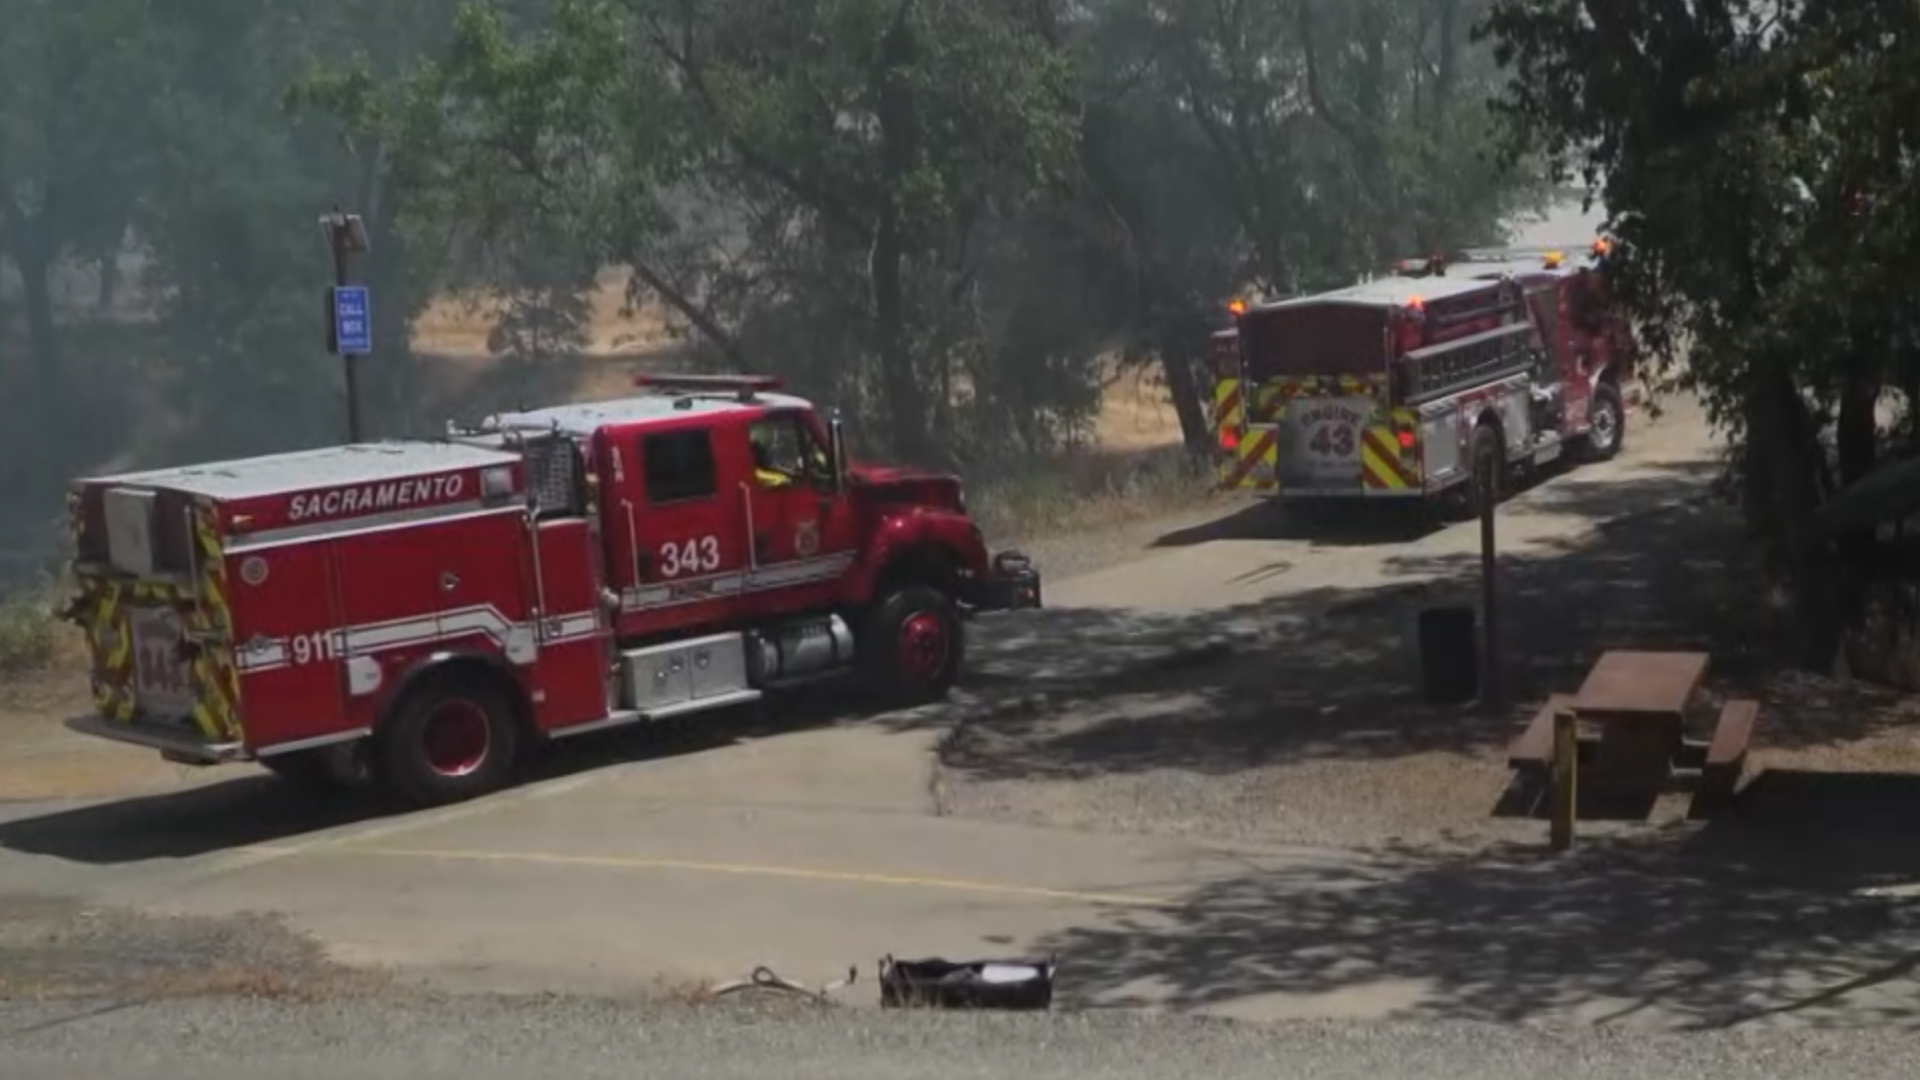 Sacramento Fire Department data show firefighters responded to 62 different fires on the parkway in 2020, the highest number in at least a decade